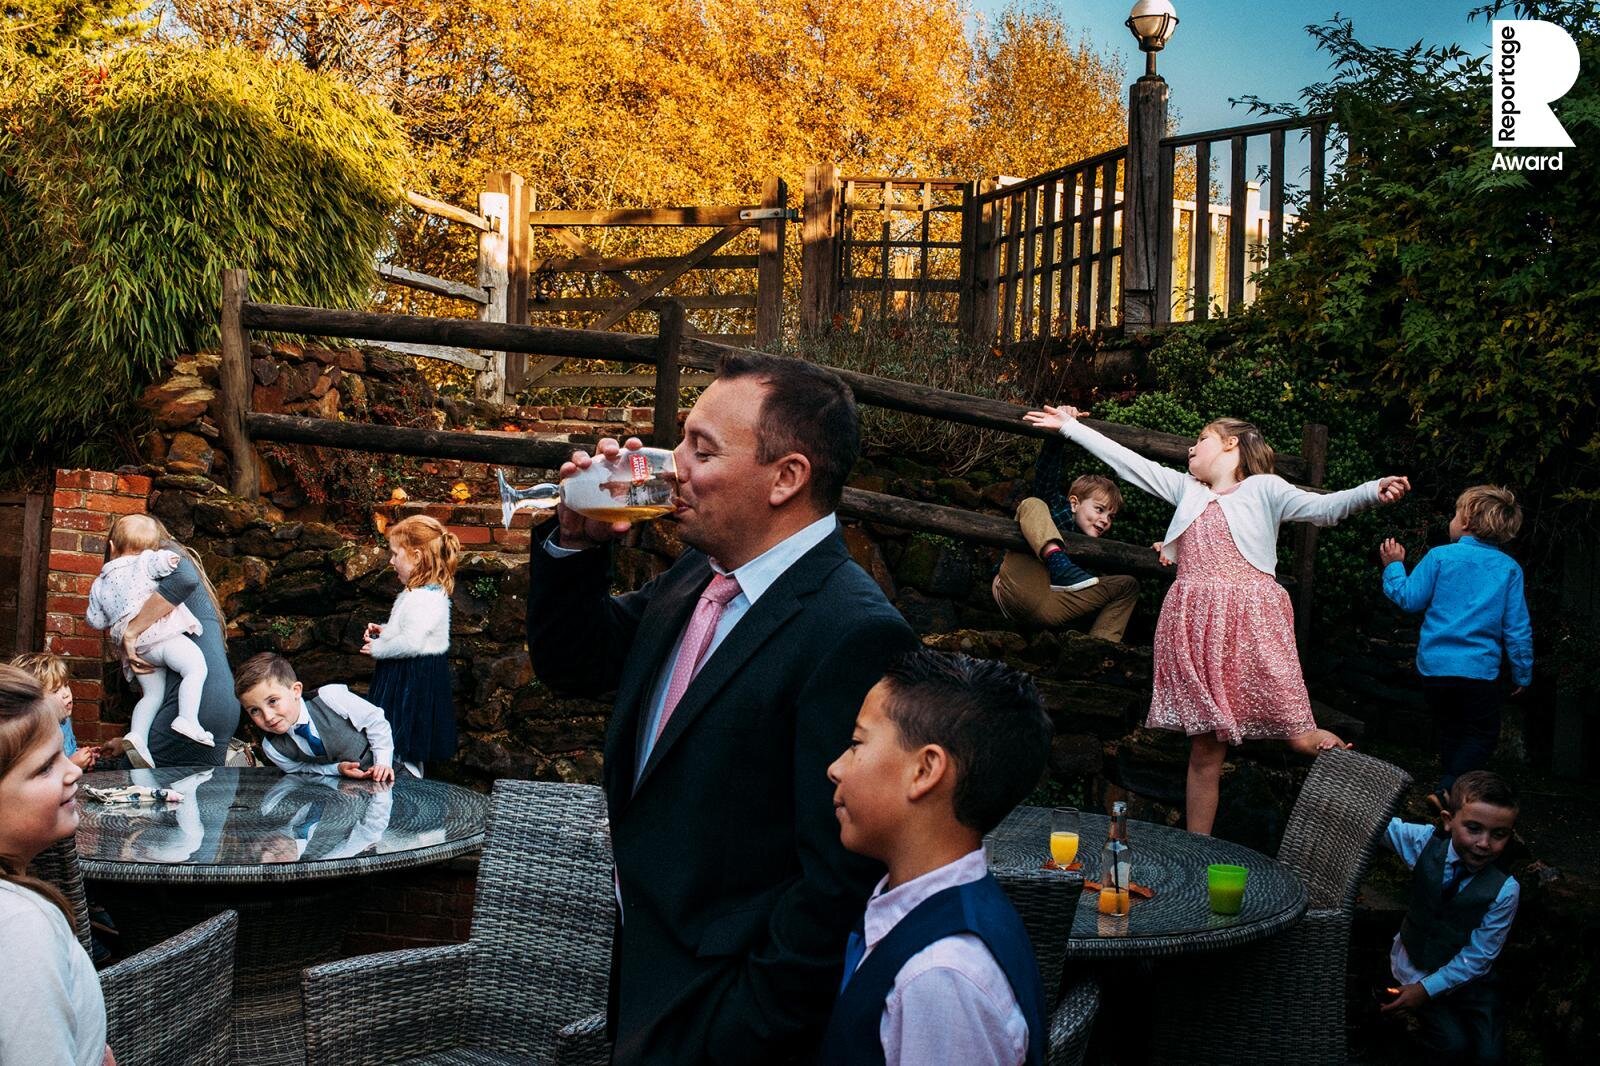  busy layered shot of kids playing and a man drinking beer 